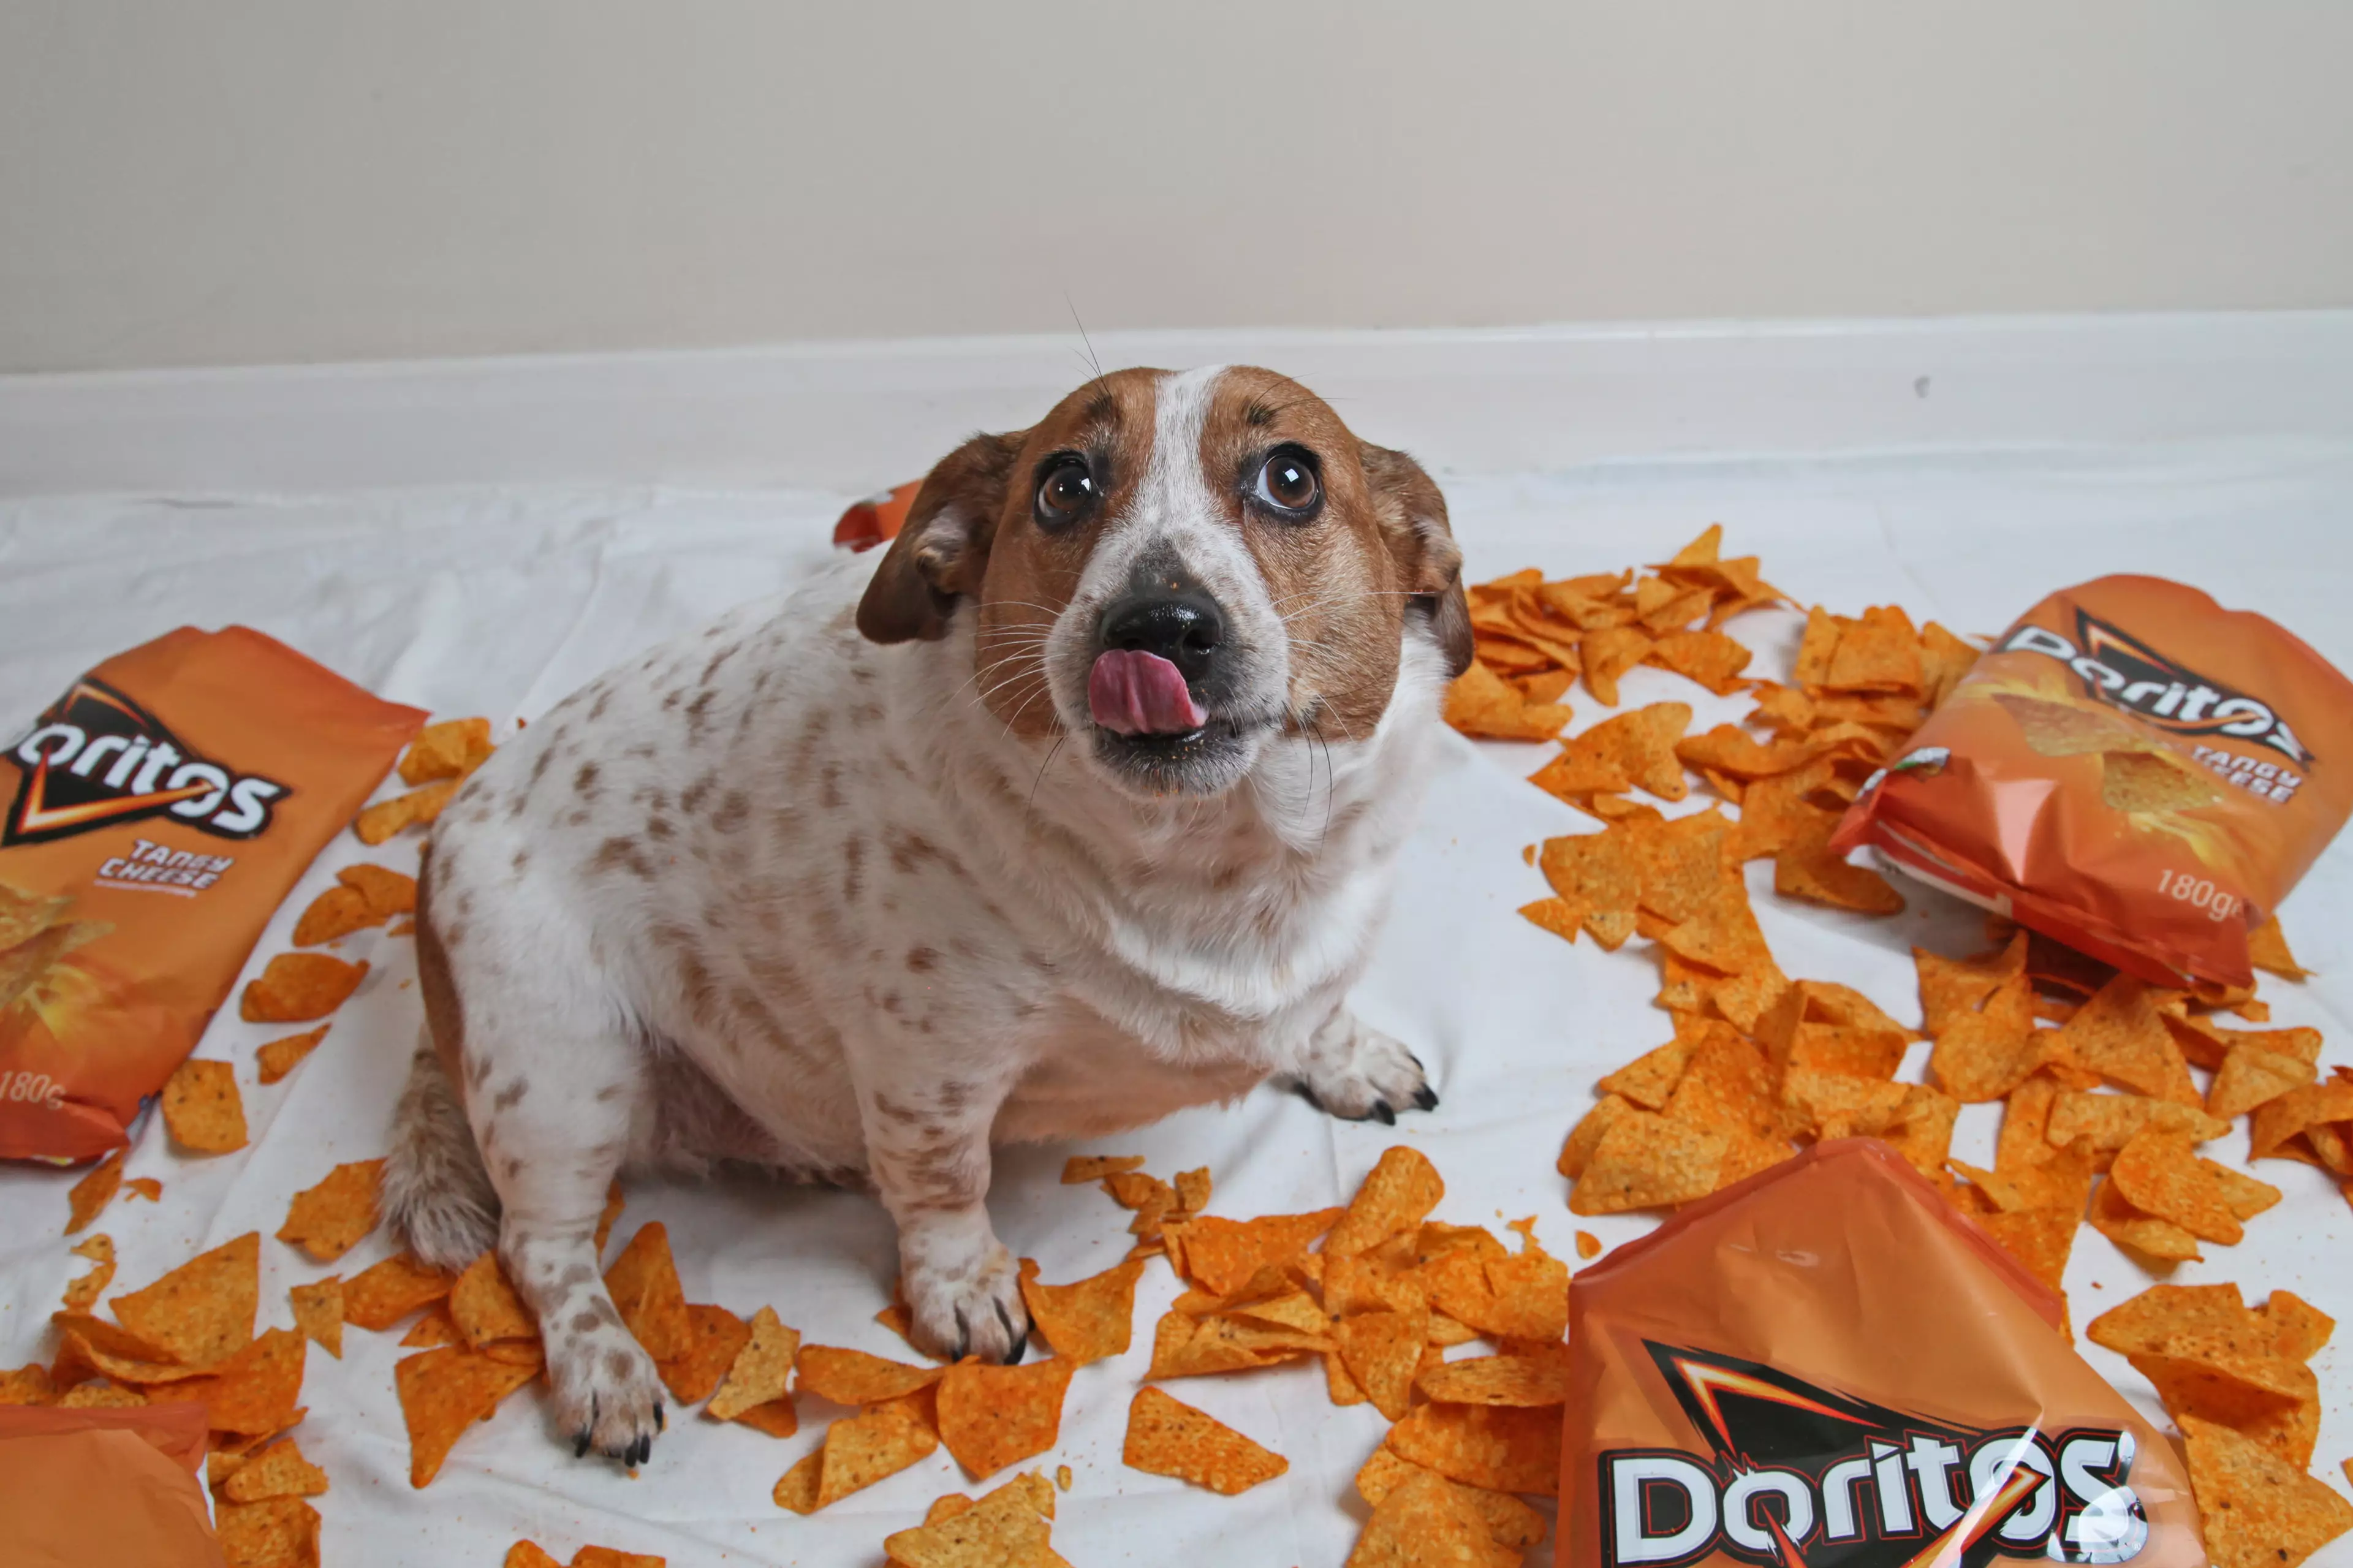 Skylar would gorge on Doritos after her owners and their neighbours couldn't resist feeding her.